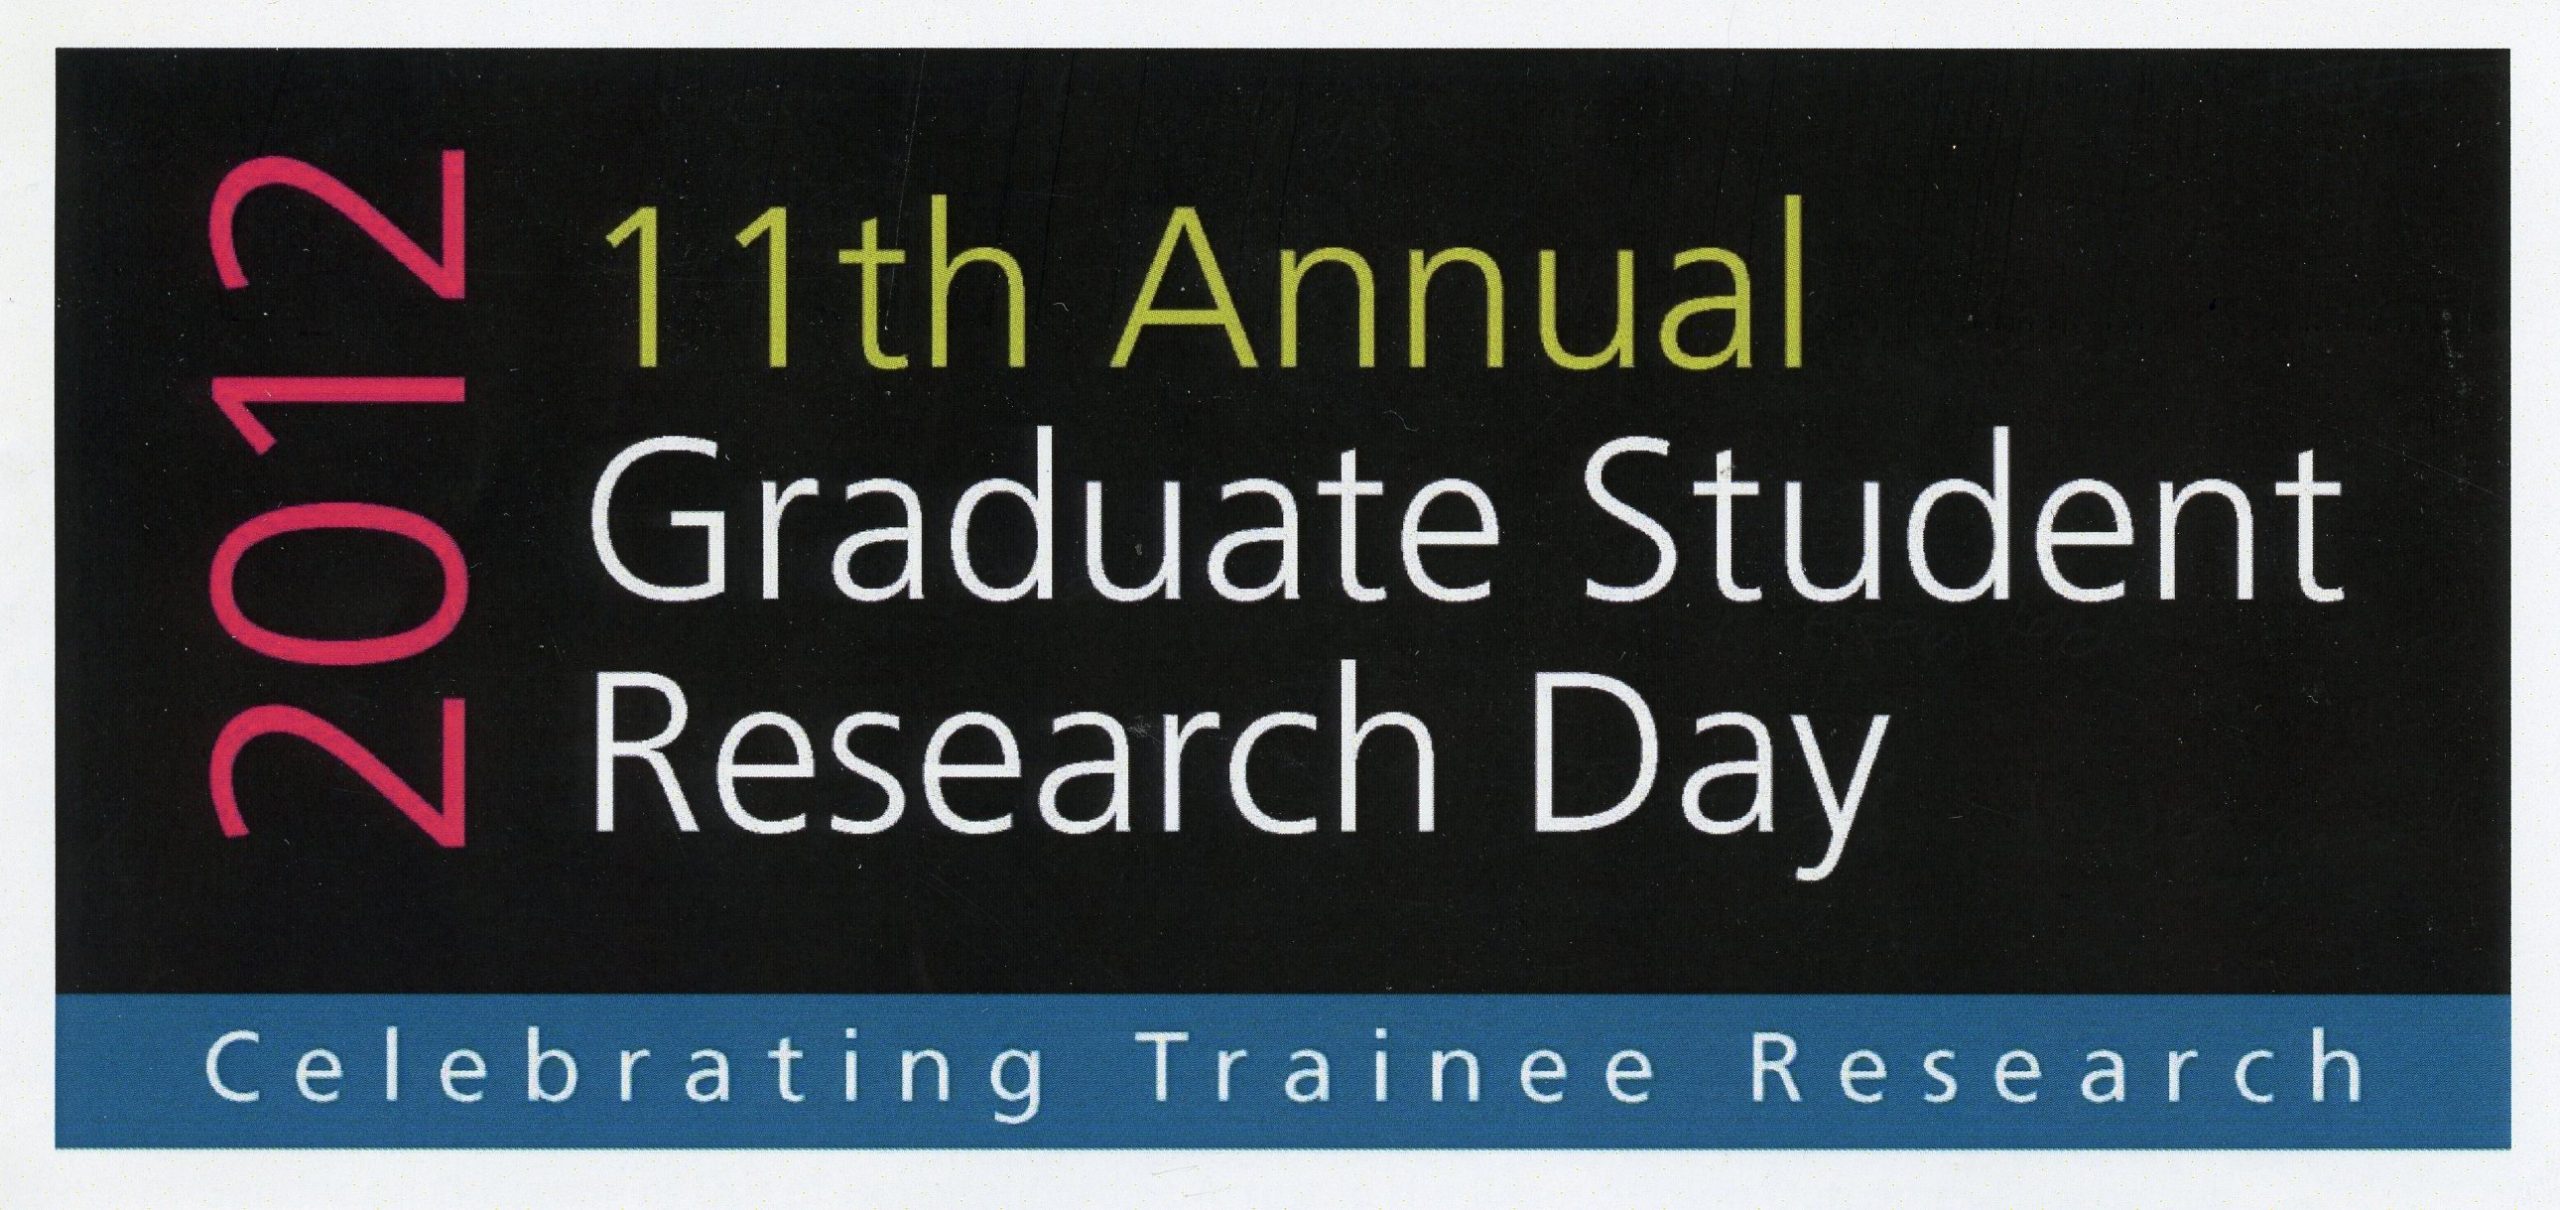 "2012 Graduate Student Research Day" poster.